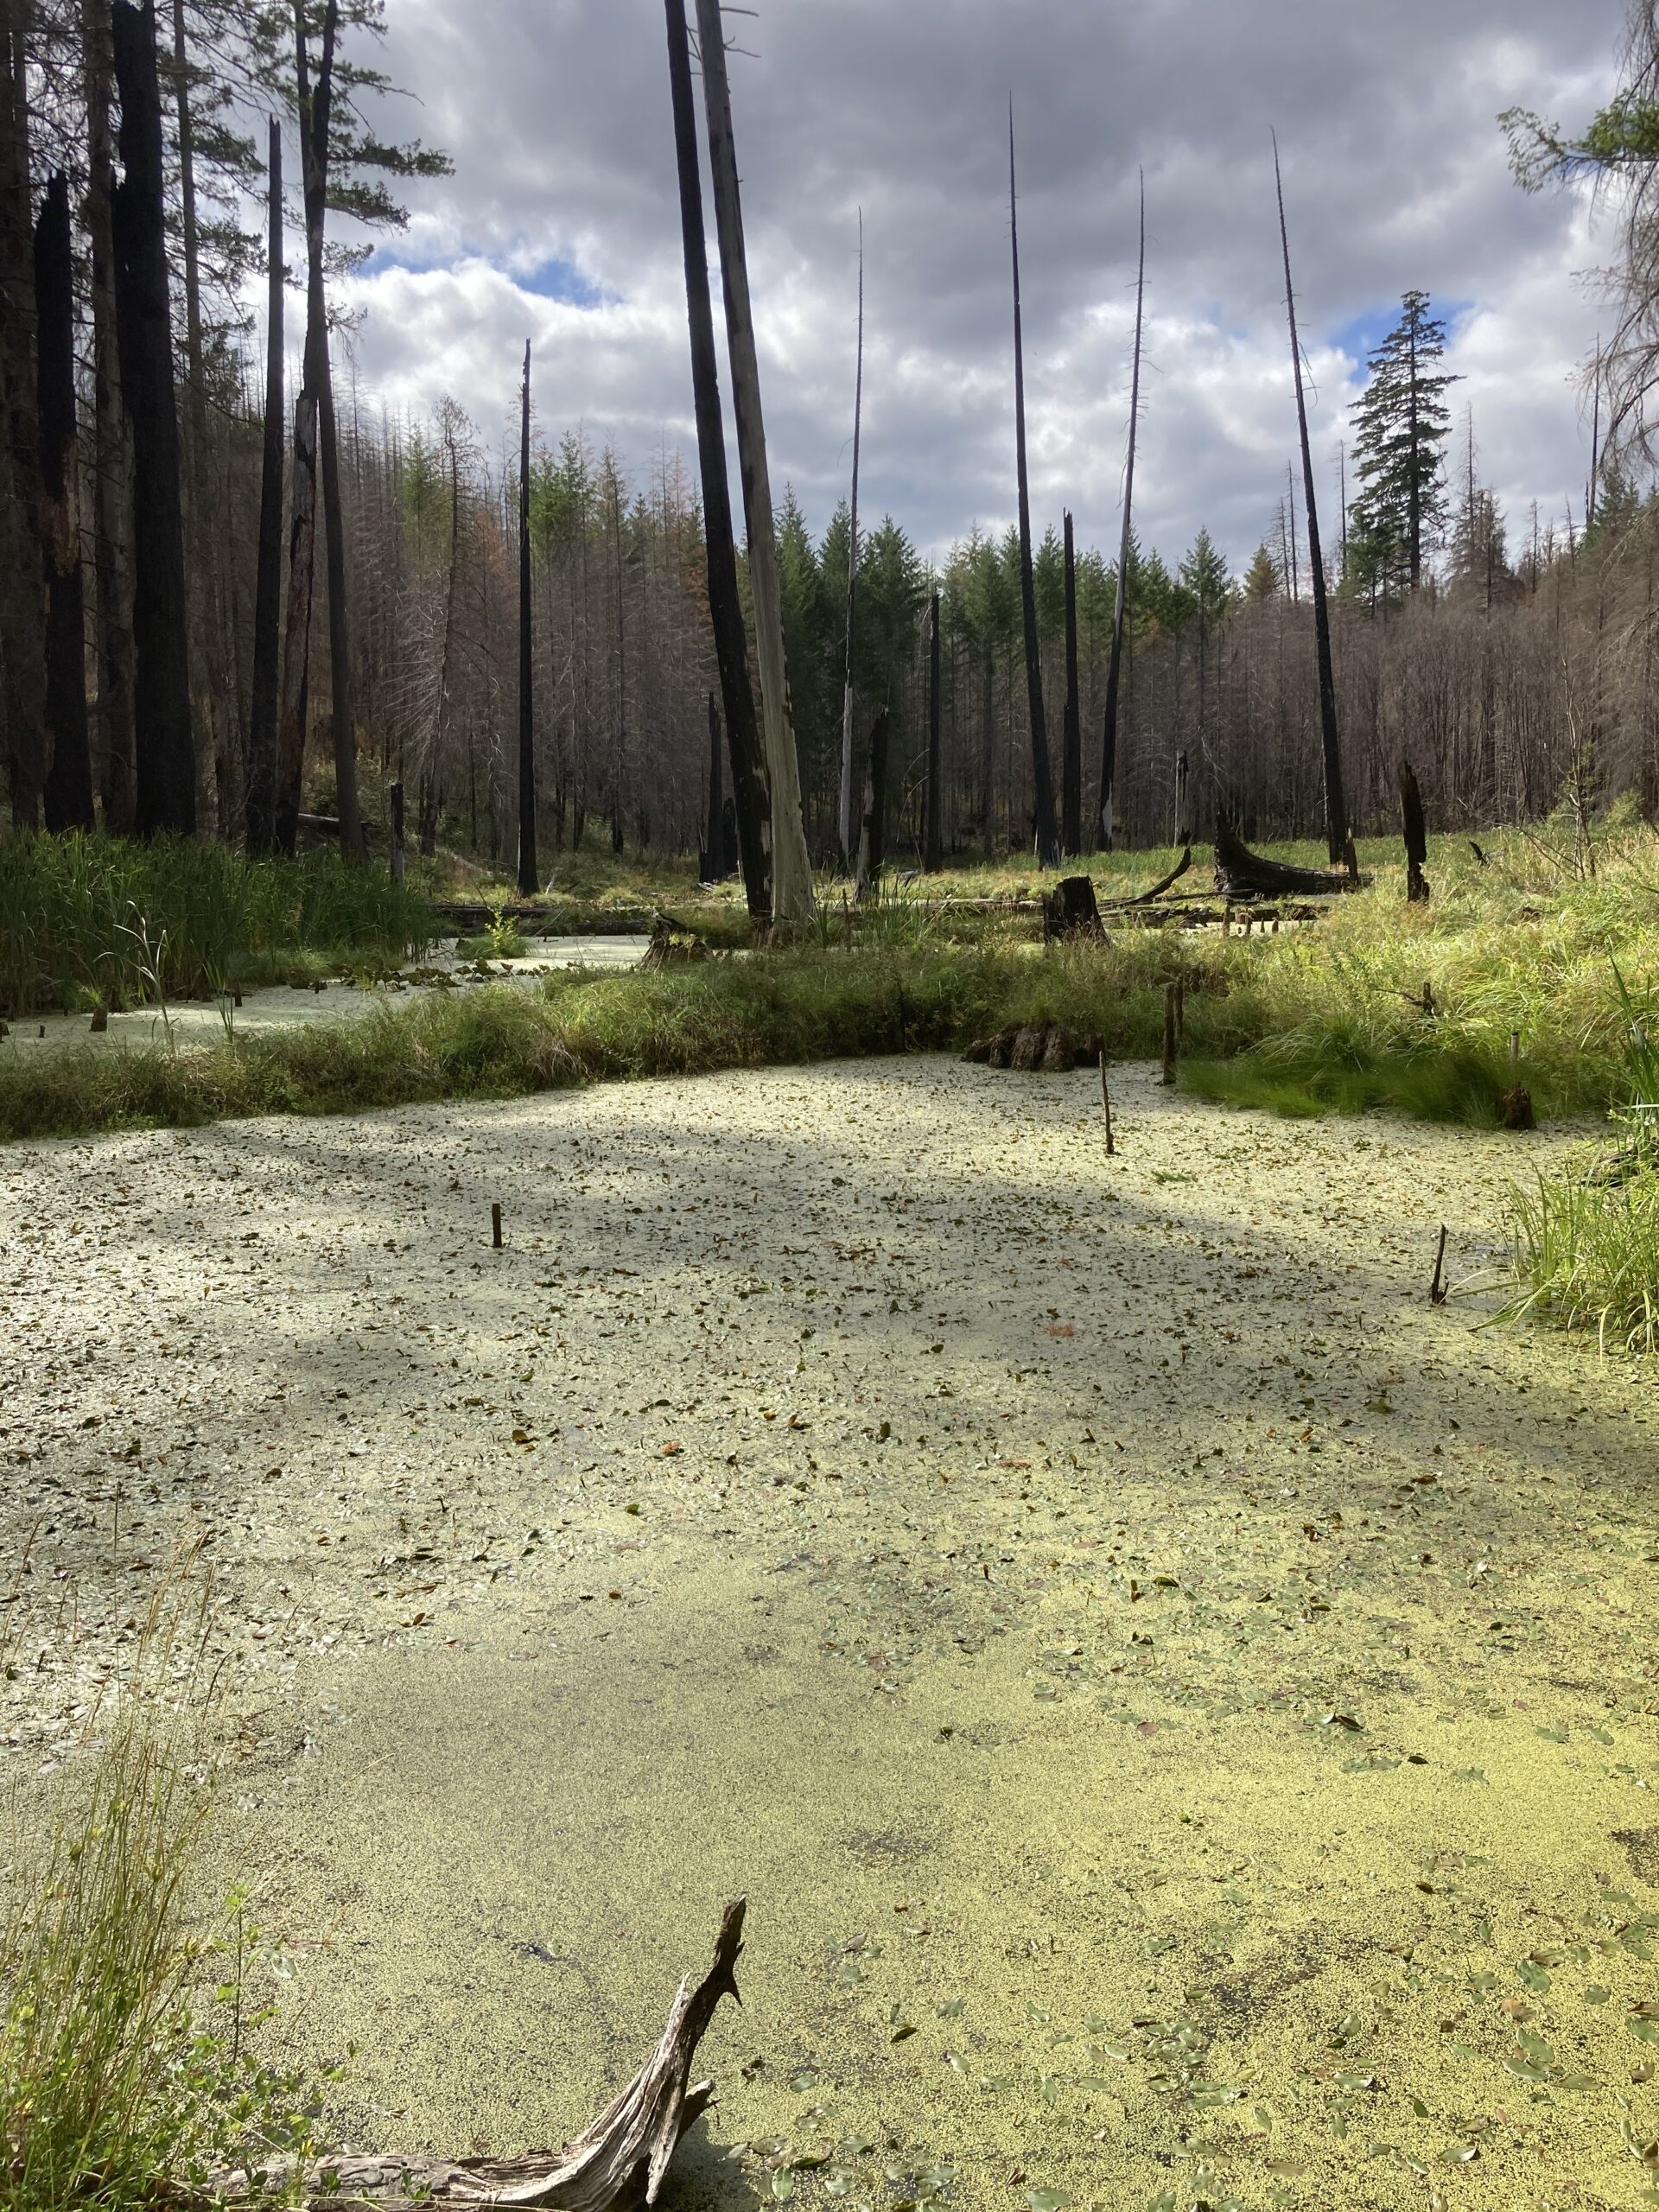 Photo of a wetland in the Riverside fire complex showing a green algal layer covering standing water. The day is cloudy and moody, with a tiny patch of blue. Behind the wetland is a line of tree, bark black from the 2020 fires.